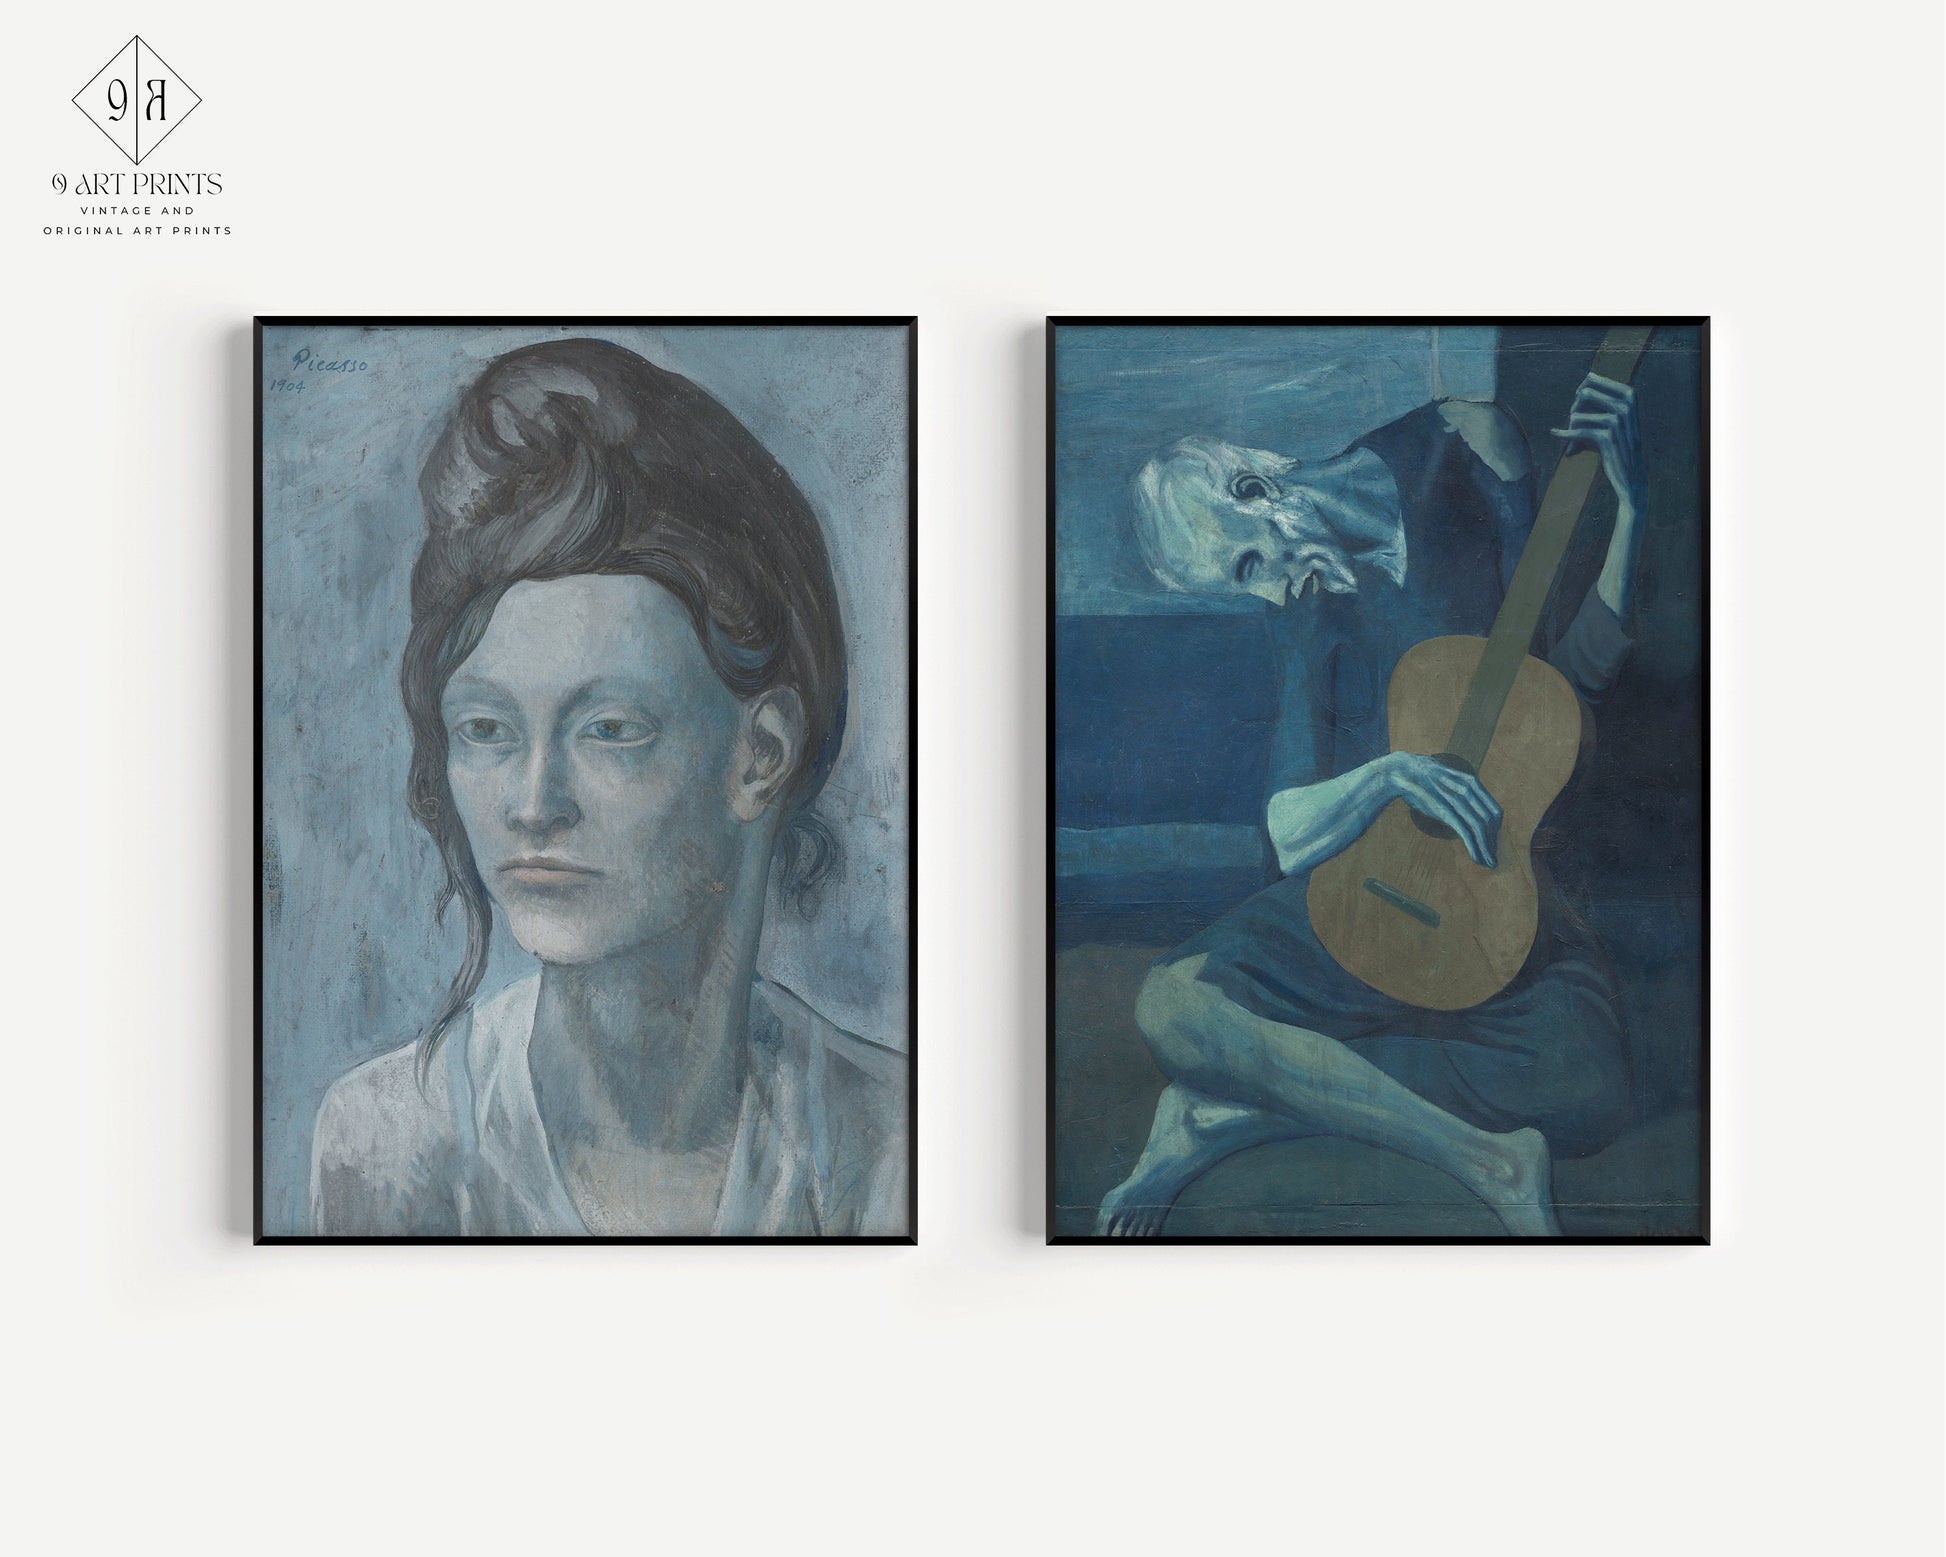 Pablo Picasso Set of 2 Art Prints - Woman with a Helmet of Hair and The Old Guitarist | Blue Gallery Wall Art (available framed or unframed)